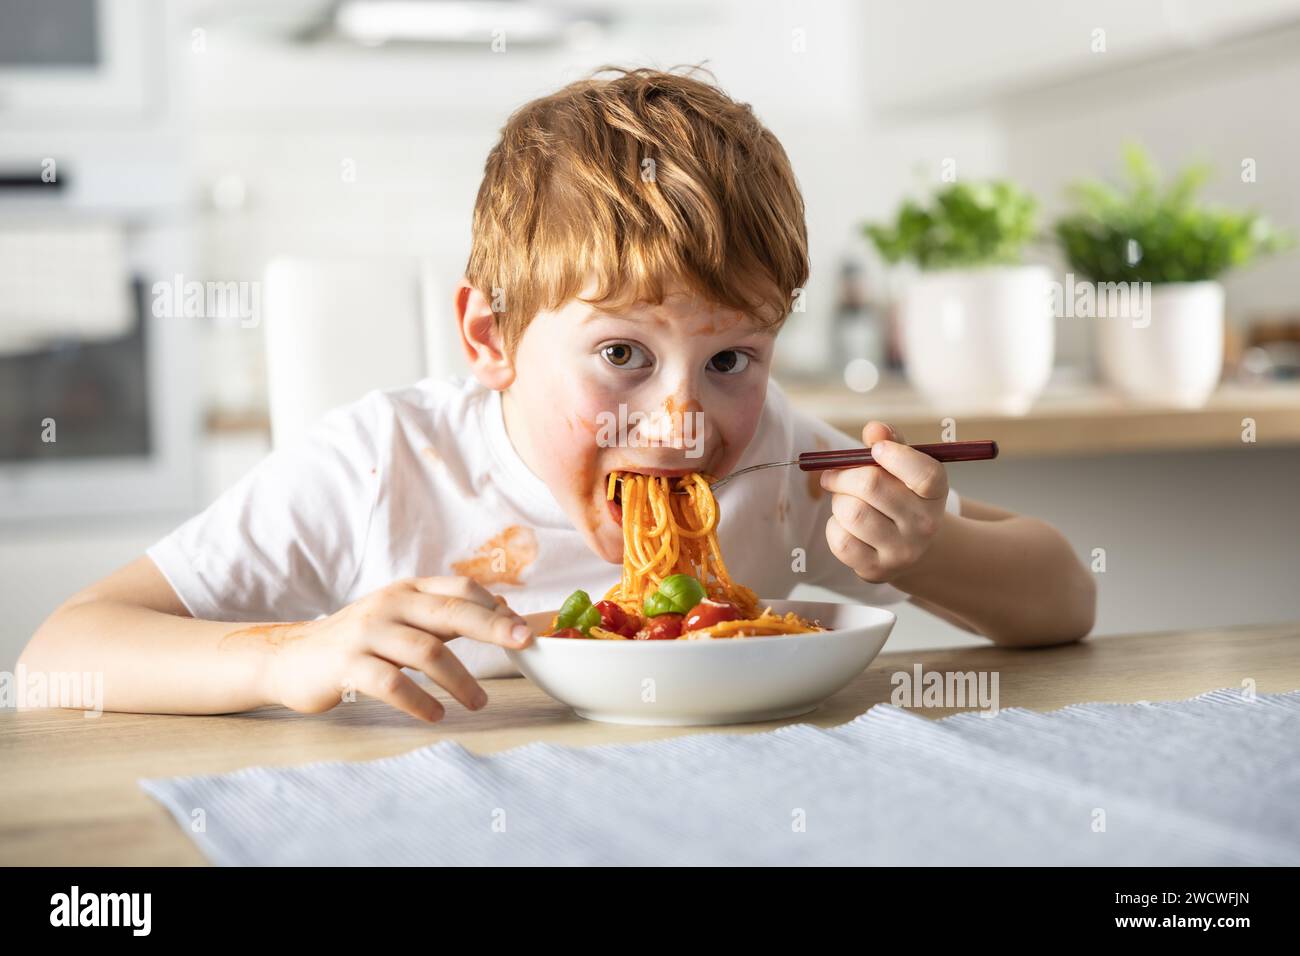 A cute little boy is eating spaghetti bolognese for lunch in the kitchen at home and is covered in ketchup. Stock Photo